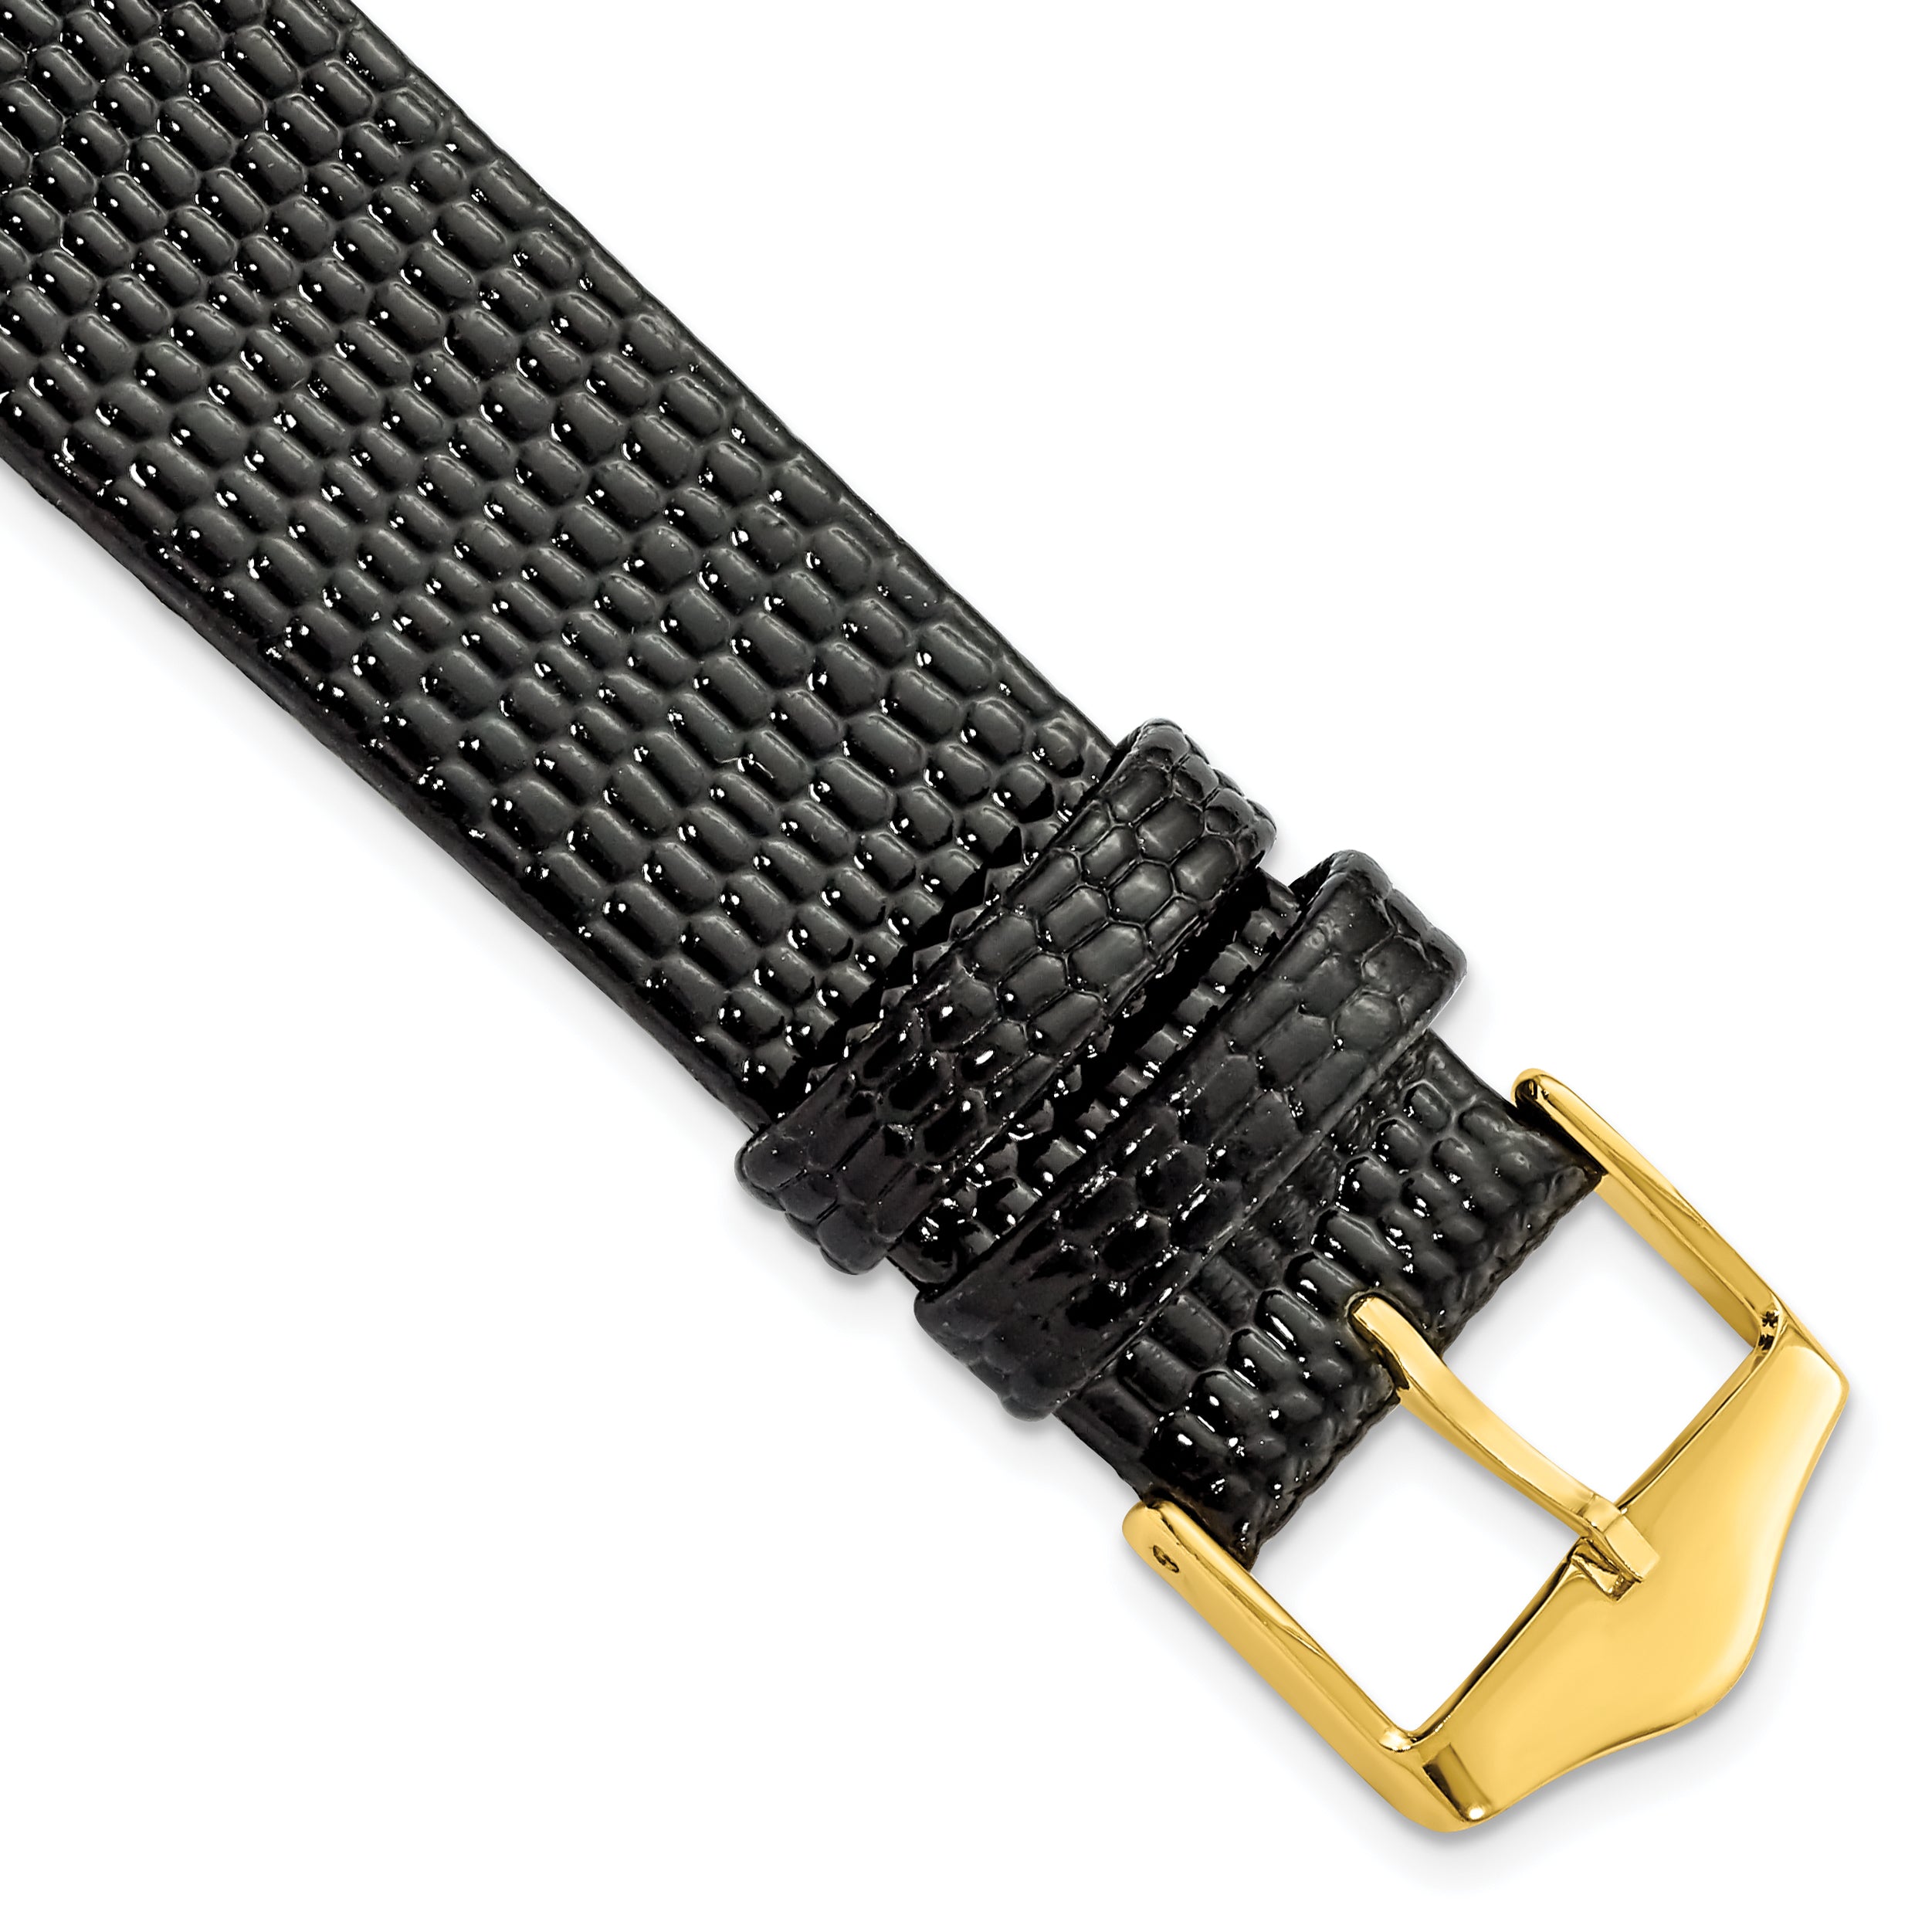 DeBeer 18mm Flat Black Lizard Grain Leather with Gold-tone Buckle 7.5 inch Watch Band